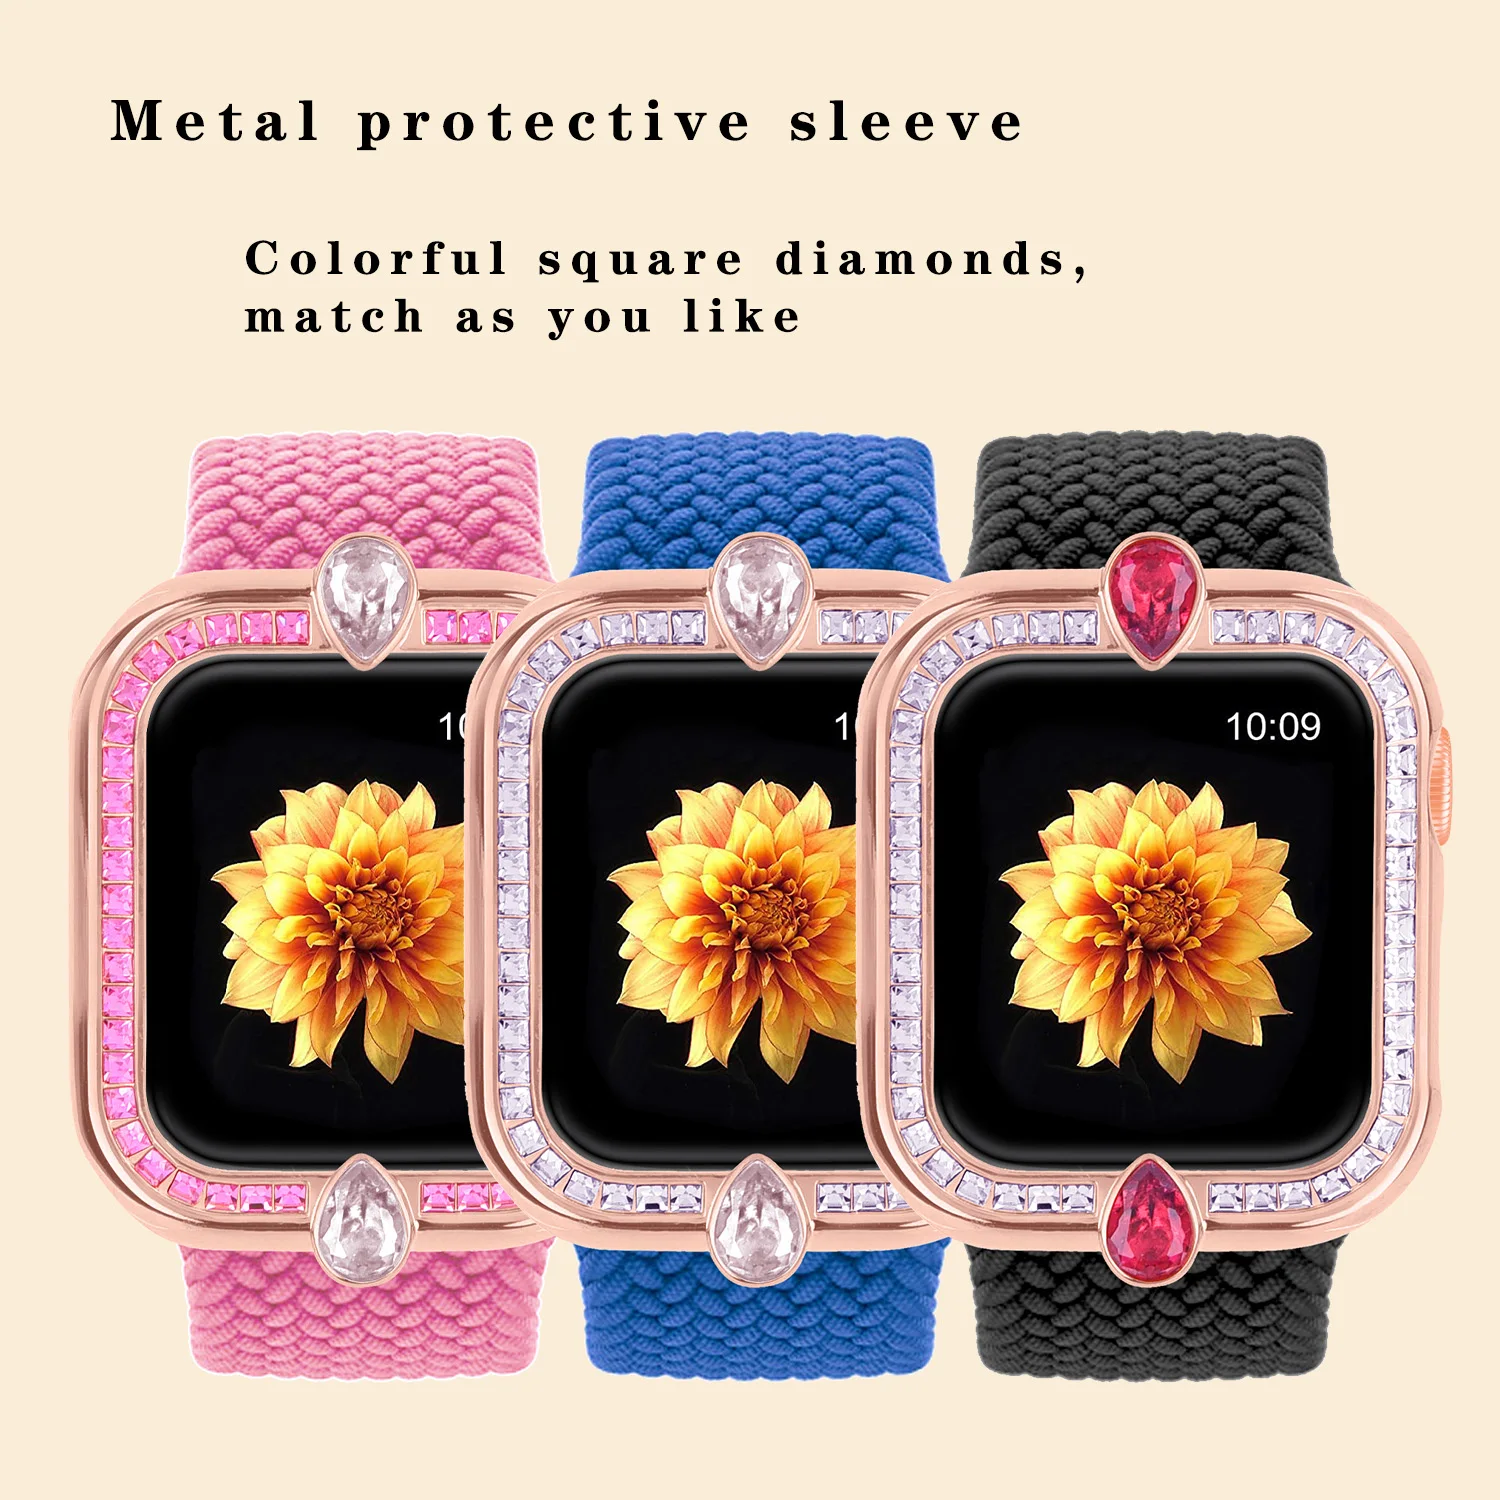 Diamond Metal Protective Case for Apple Watch Cover Series 6 SE 5 4 3 2 1 38MM 42MM For IWatch 54 40mm 44mm iWatch accessories